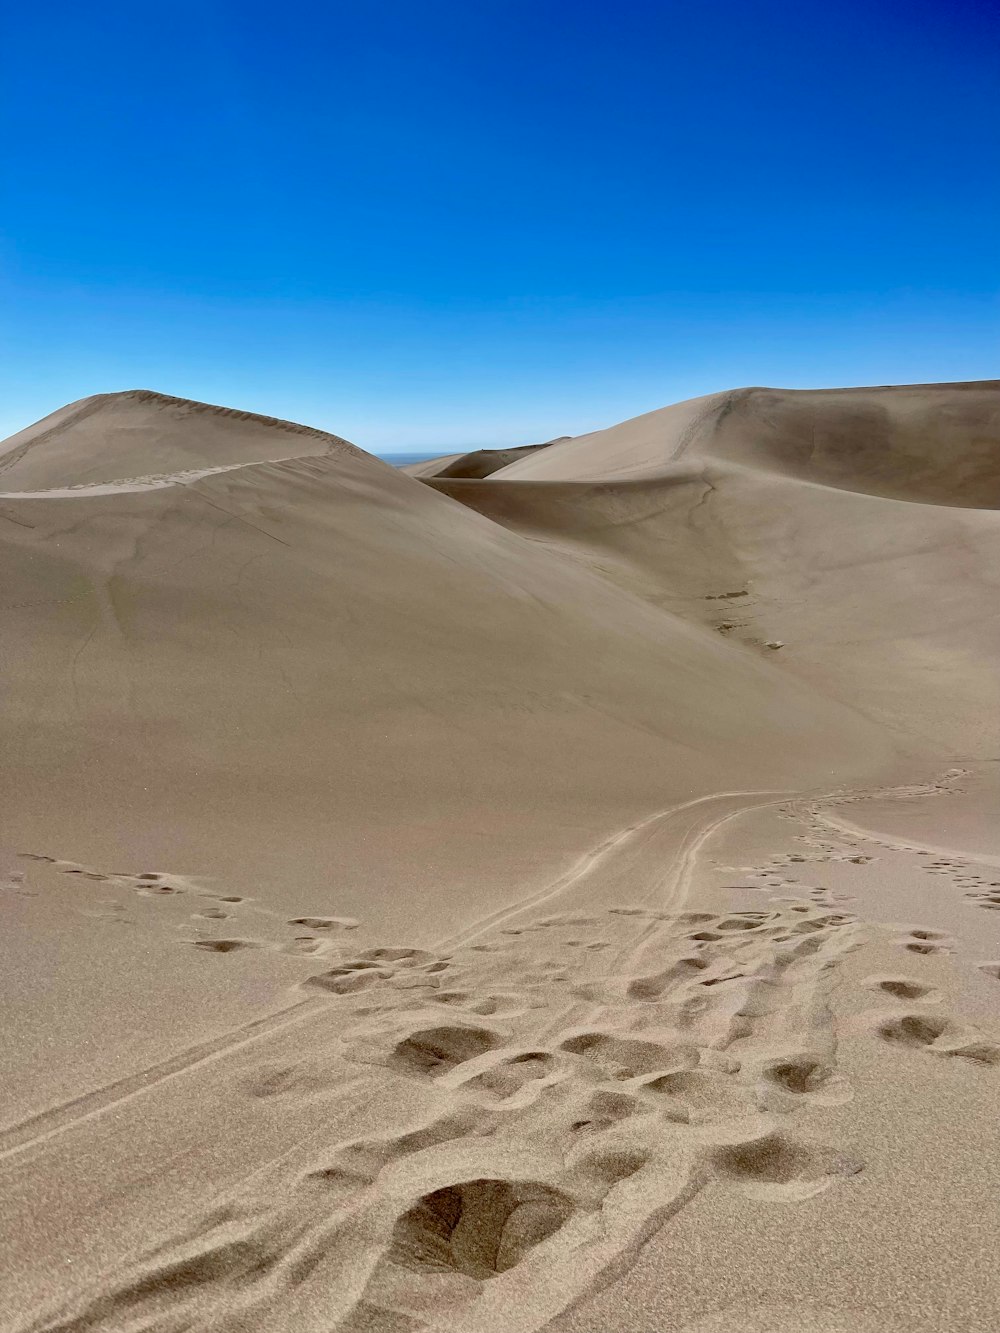 footprints in the sand of a desert under a blue sky